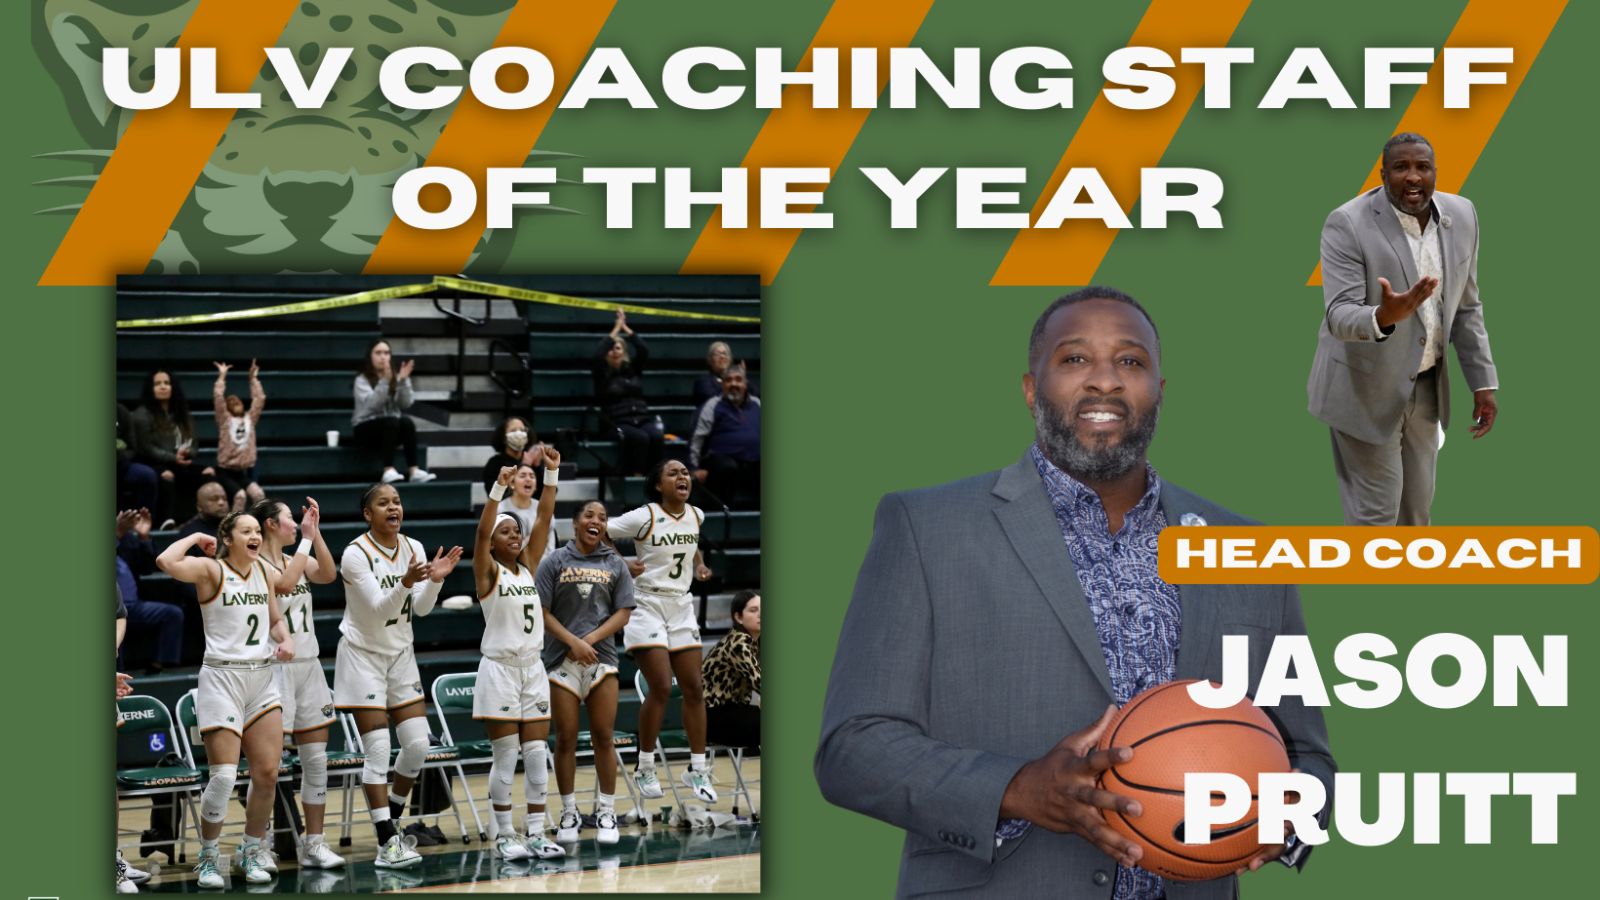 Jason Pruitt And His Staff Named The 2023 SCIAC Coaching Staff Of The Year